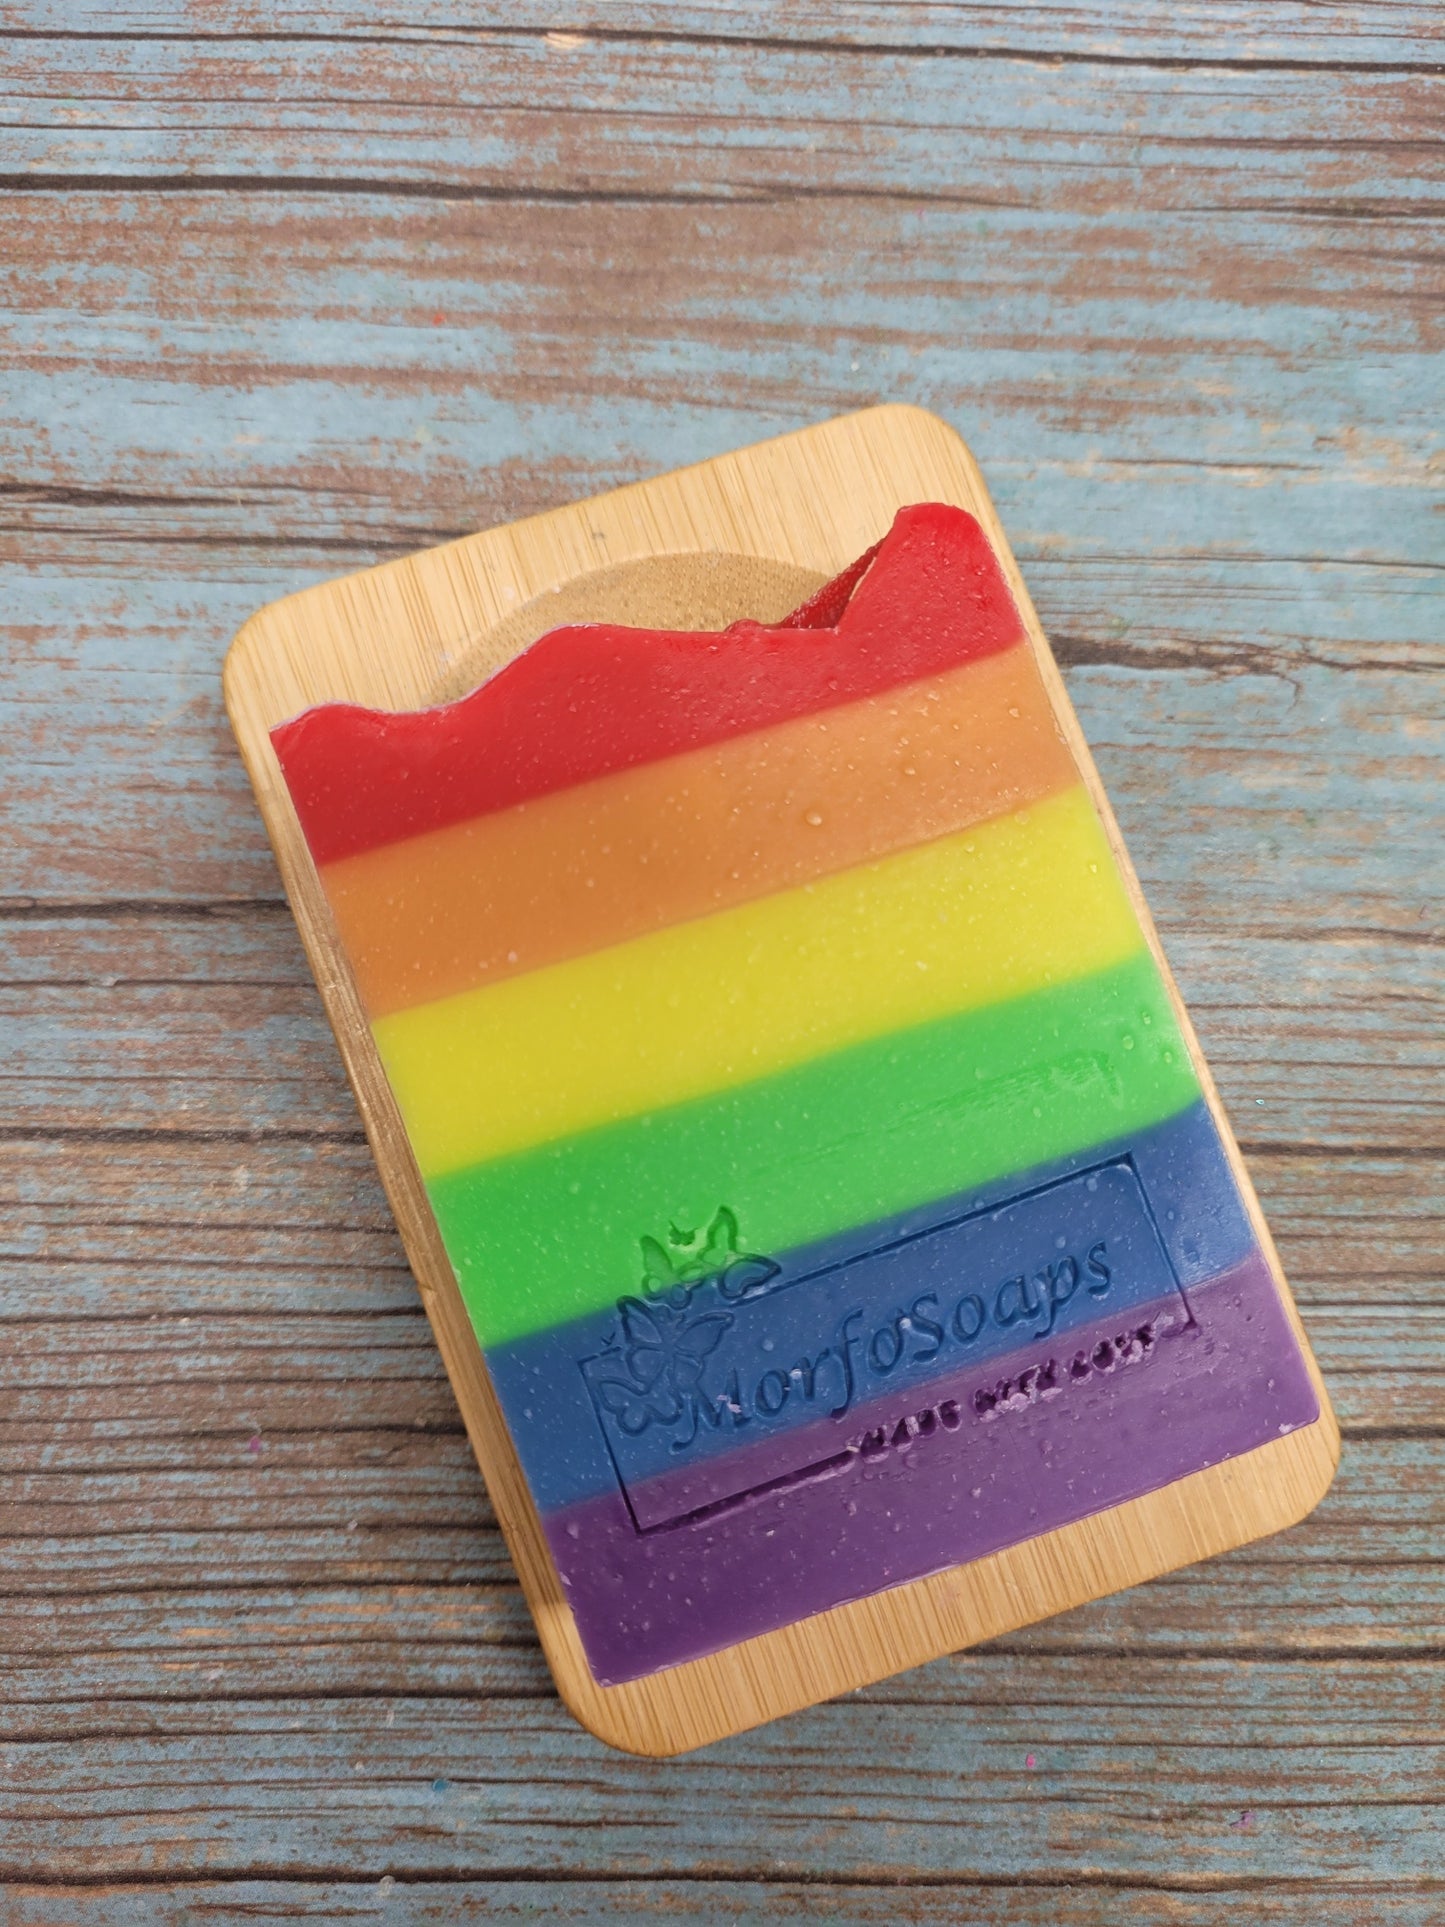 Rainbow Soap by Morfosoaps